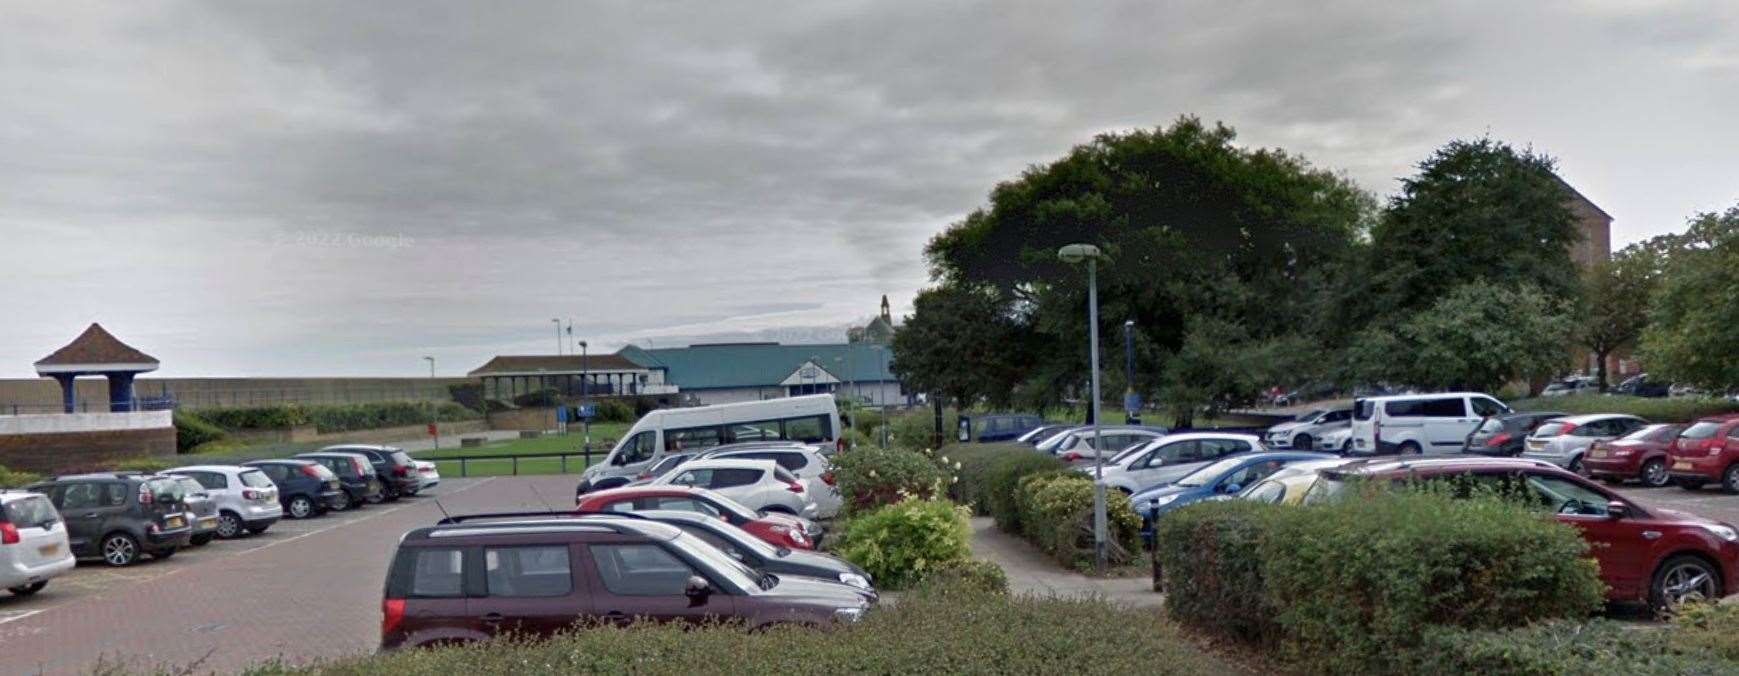 Beachfields Car Park, with Sheerness Swimming Pool in the background, is a site no longer offering free parking after 6pm for visitors. Picture: Google